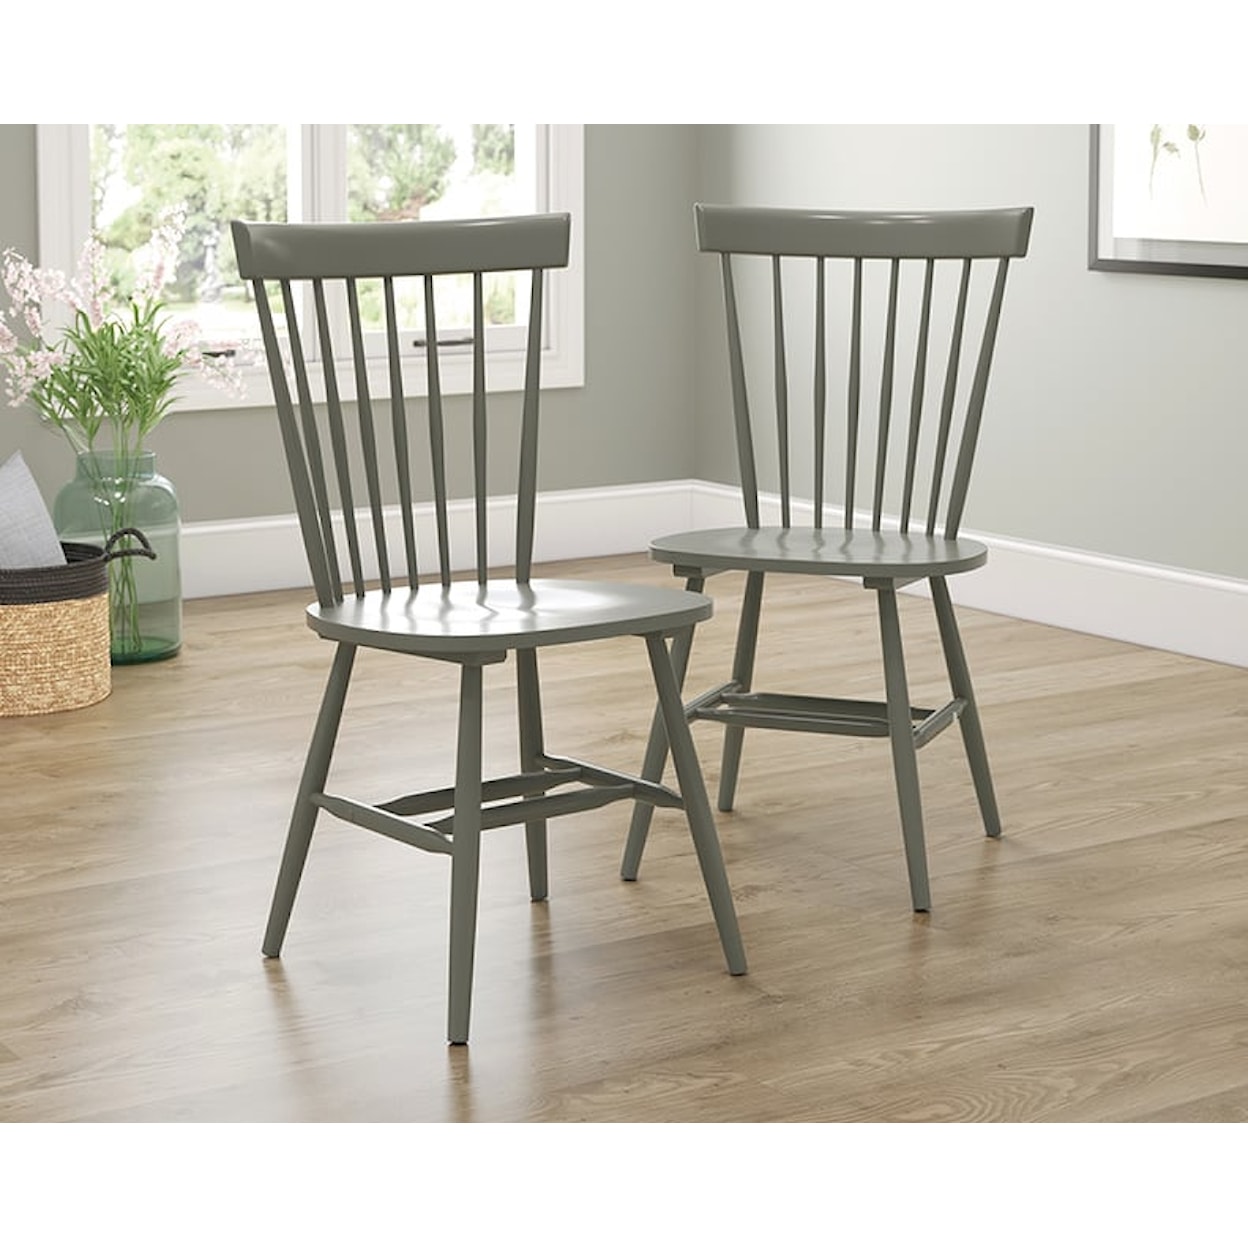 Sauder New Grange Spindle Chairs